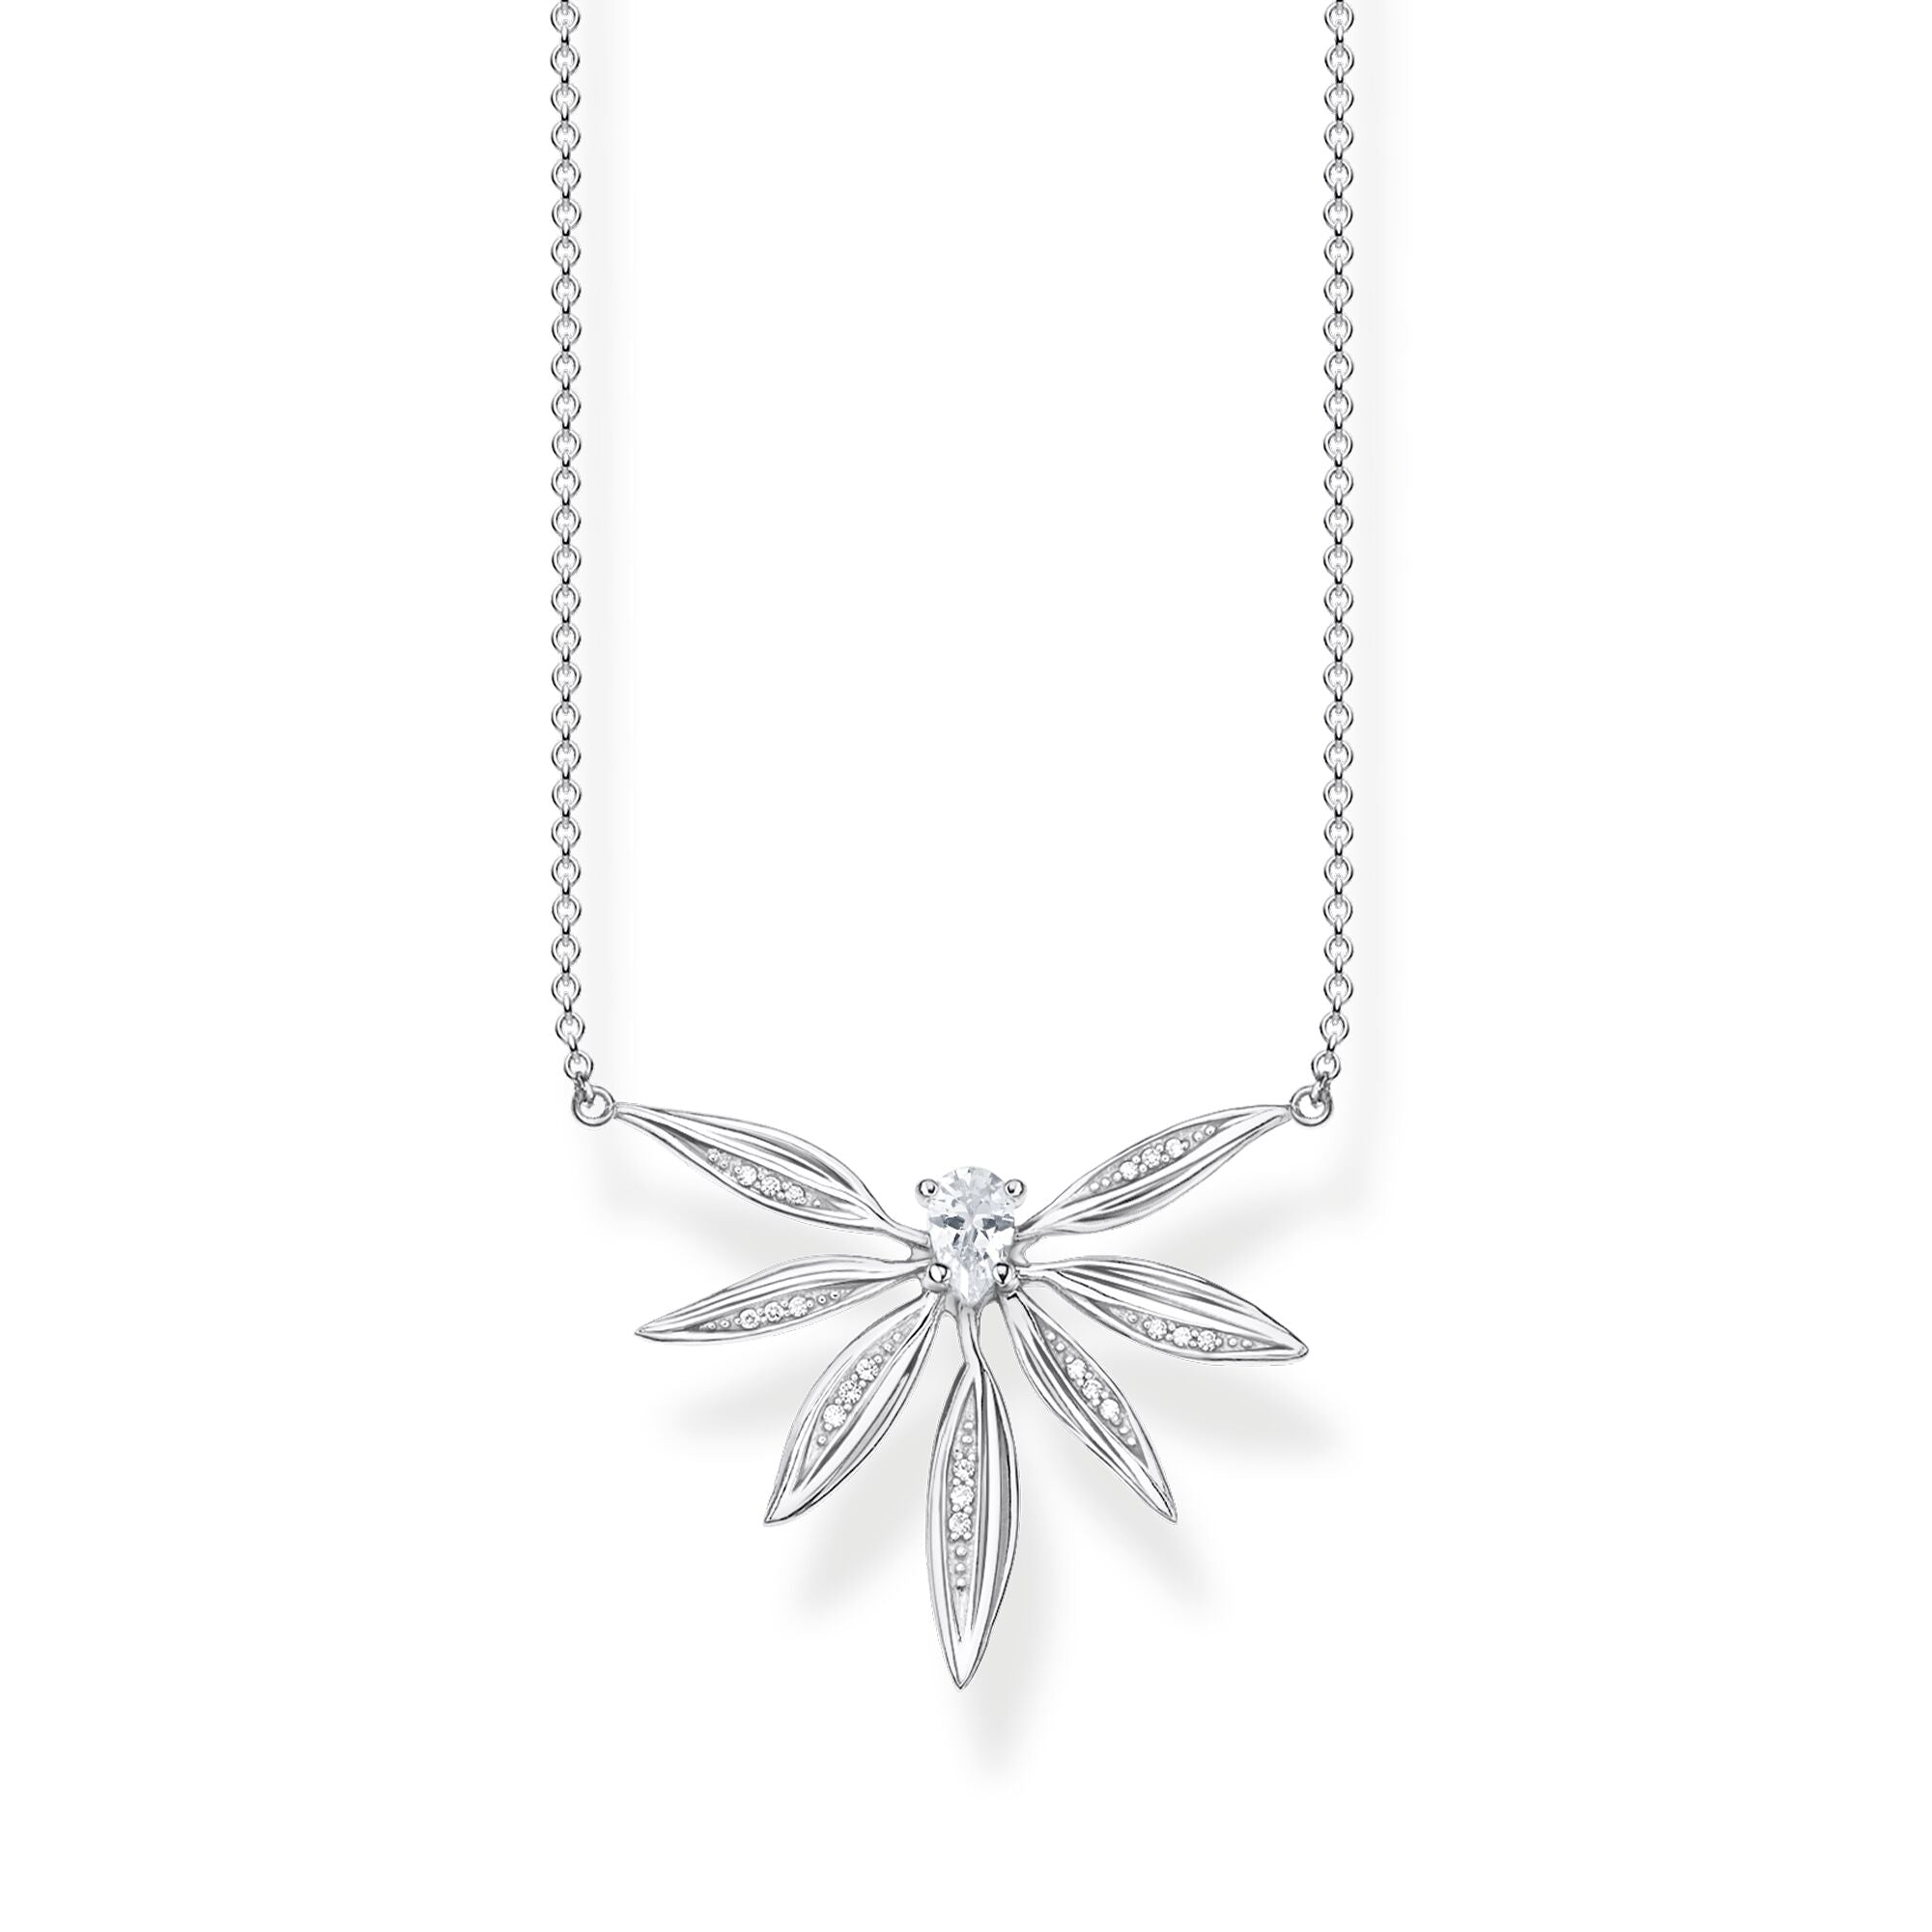 Leaves Necklace Small - Silver